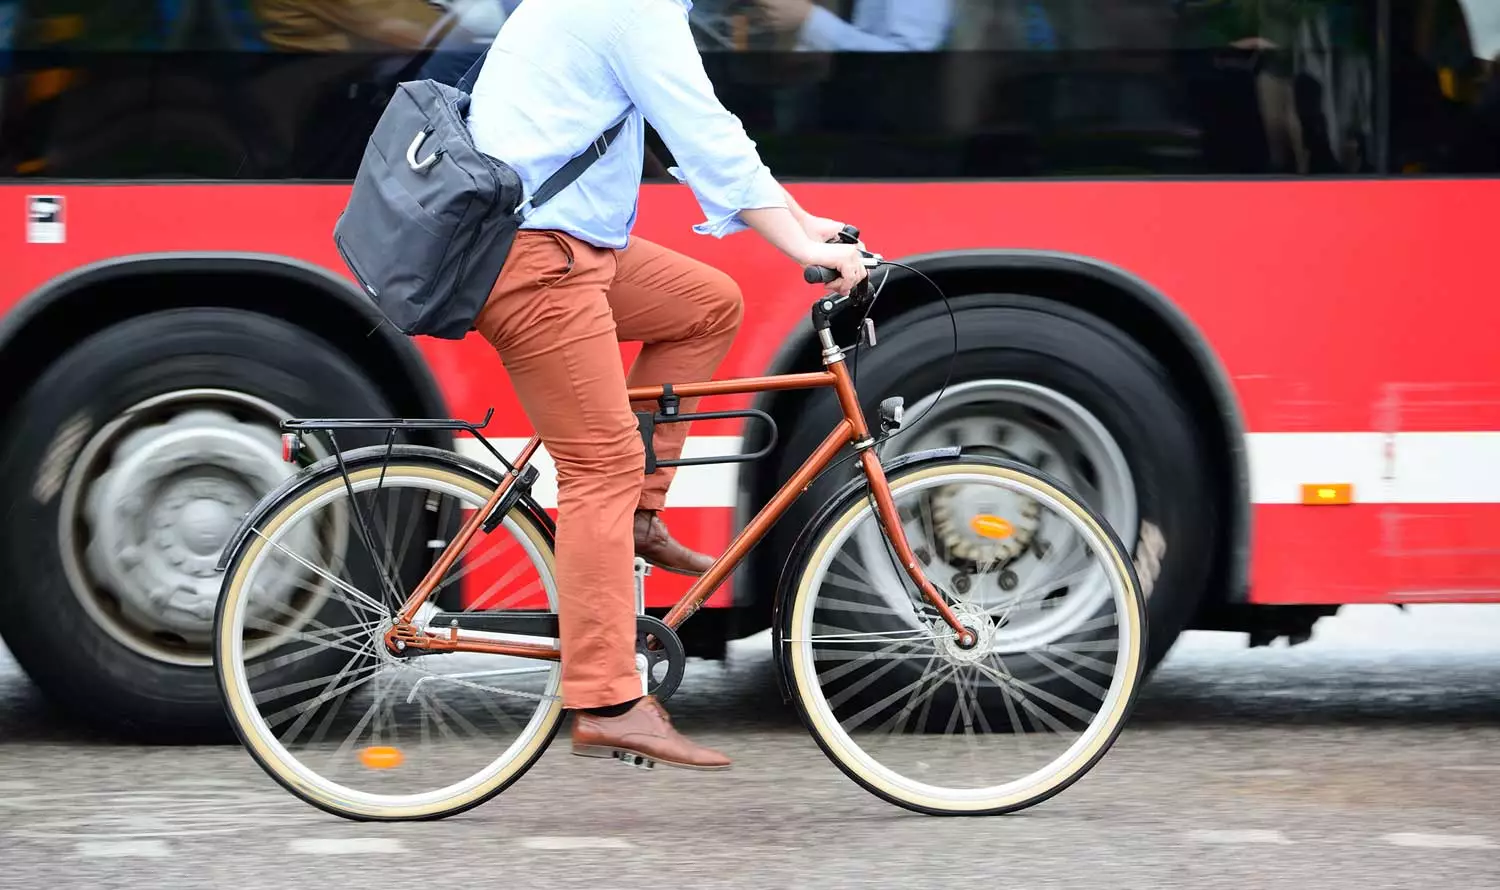 Puncture Proof Airless Inserts for Commuting